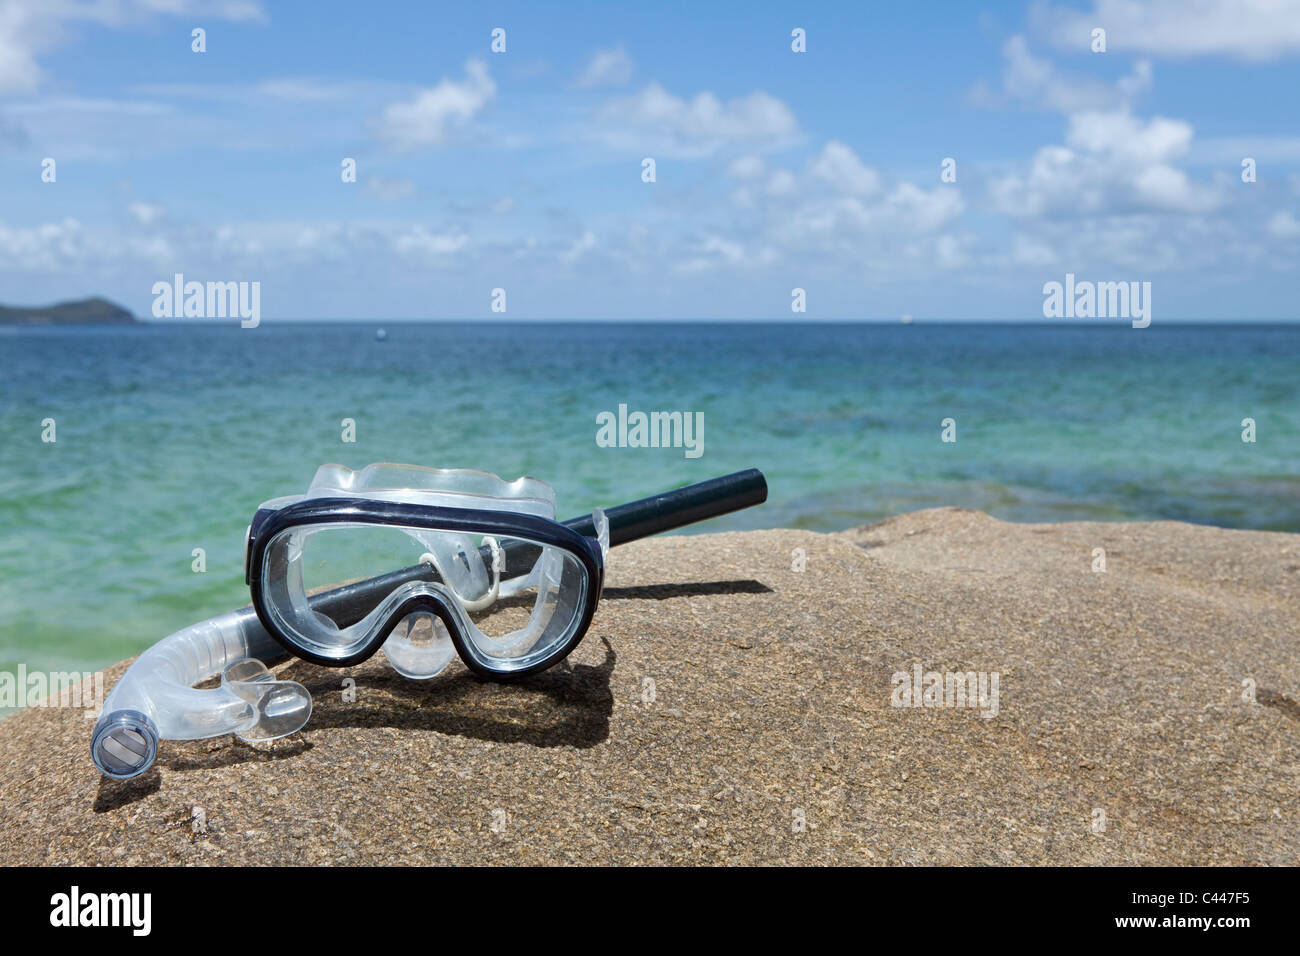 A diving mask and snorkel on a rock near the sea Stock Photo